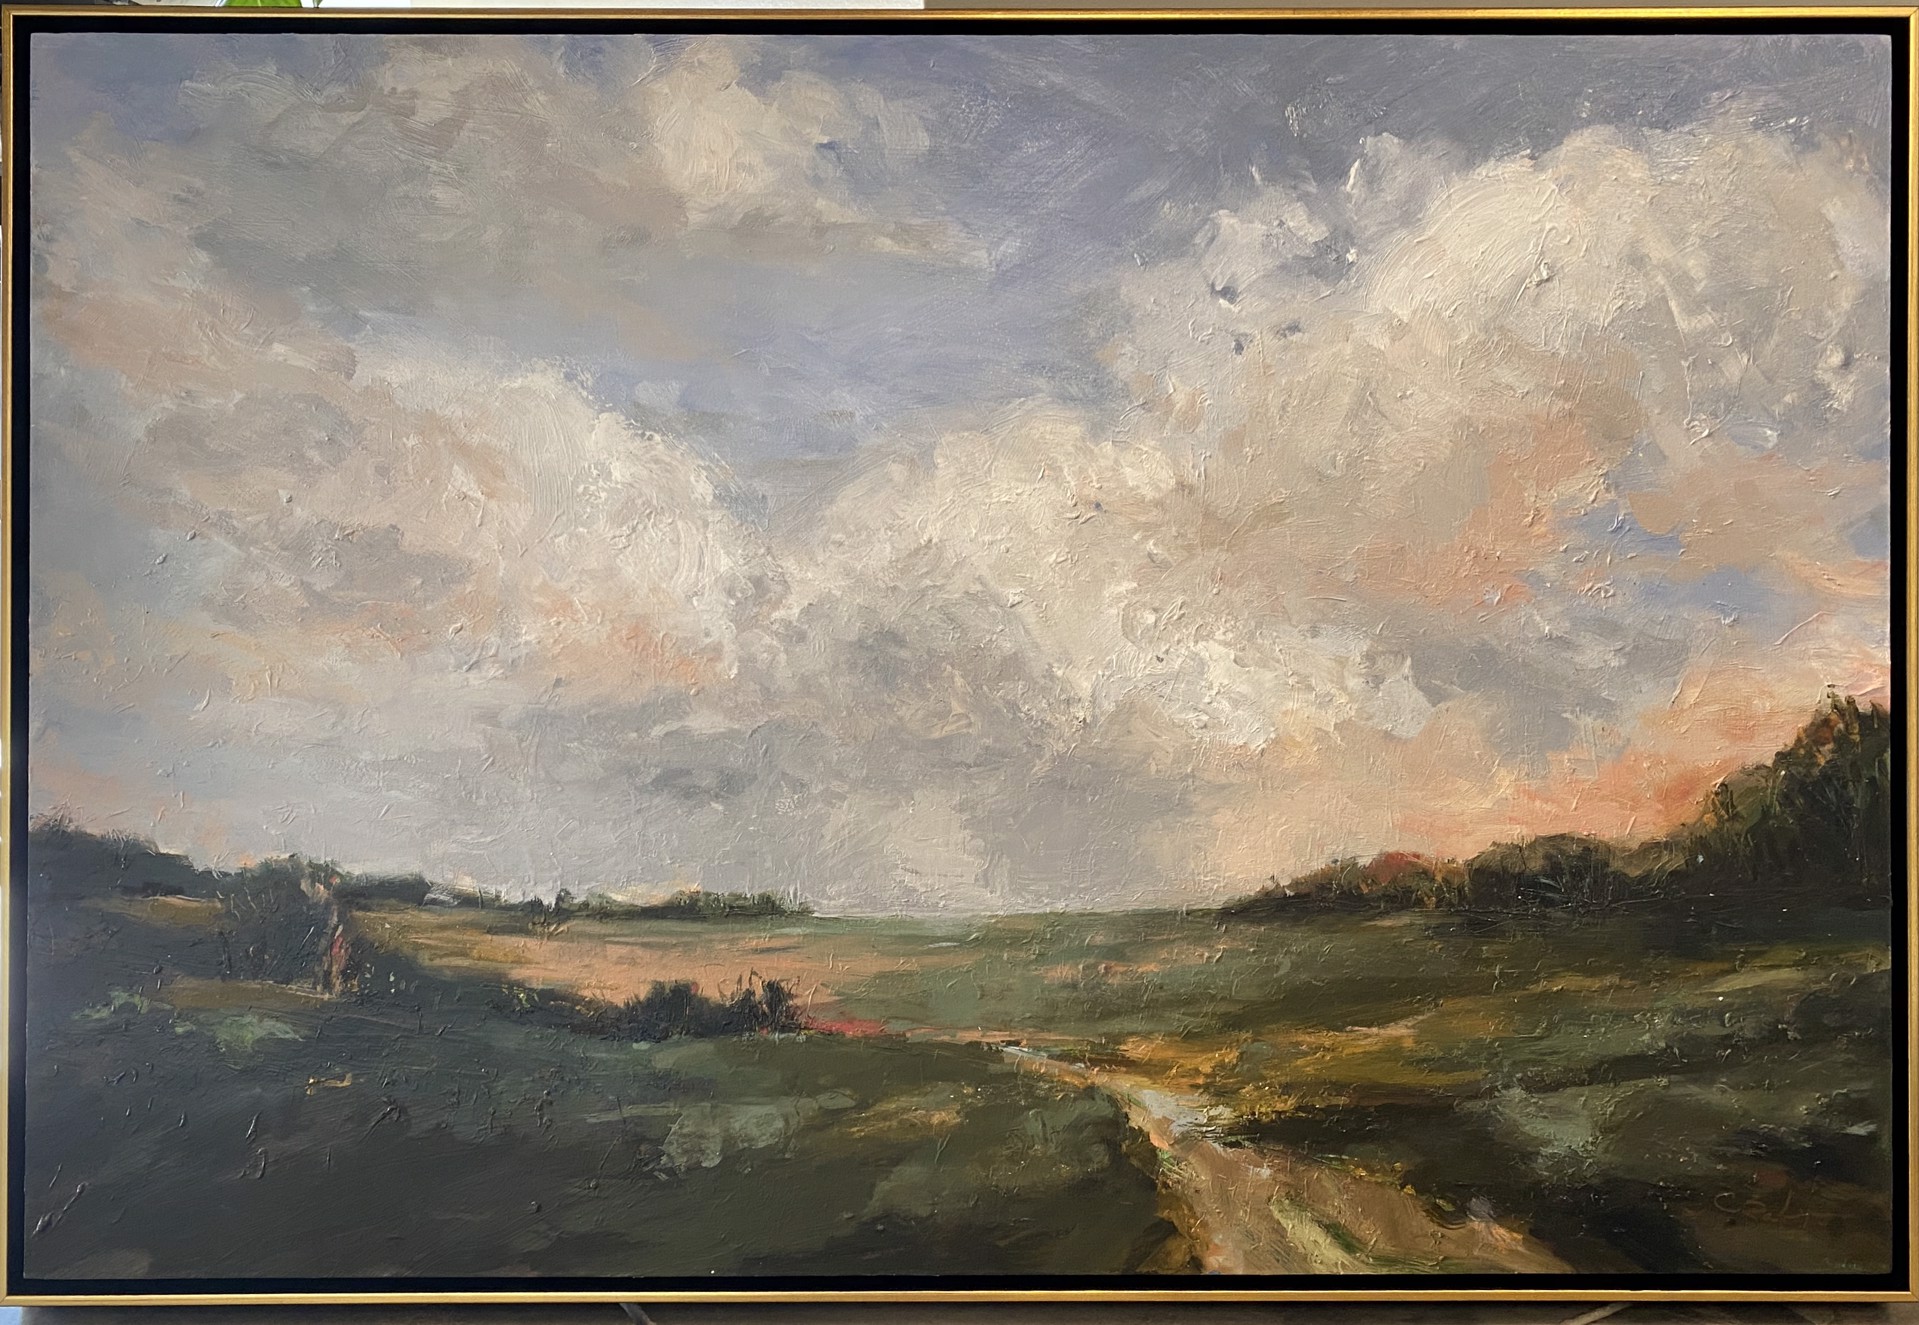 Commission oil on canvas landscape by Clarissa Randolph 36x50 / custom framed